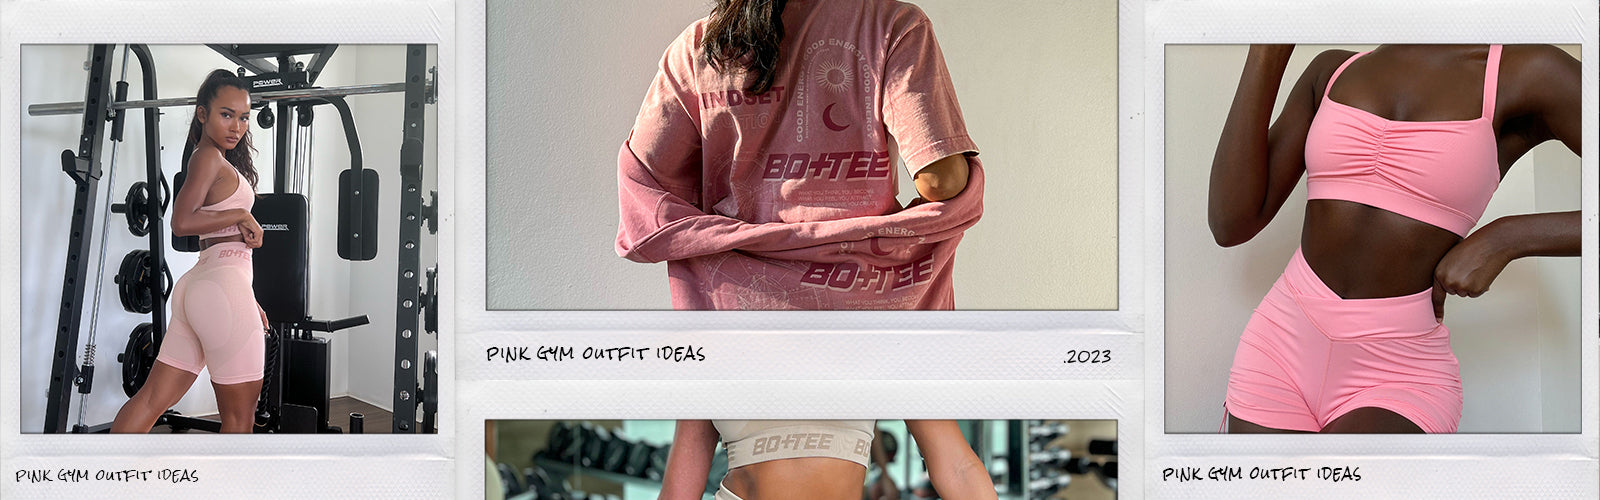 Stylish Pink and White Gym Outfit Inspiration